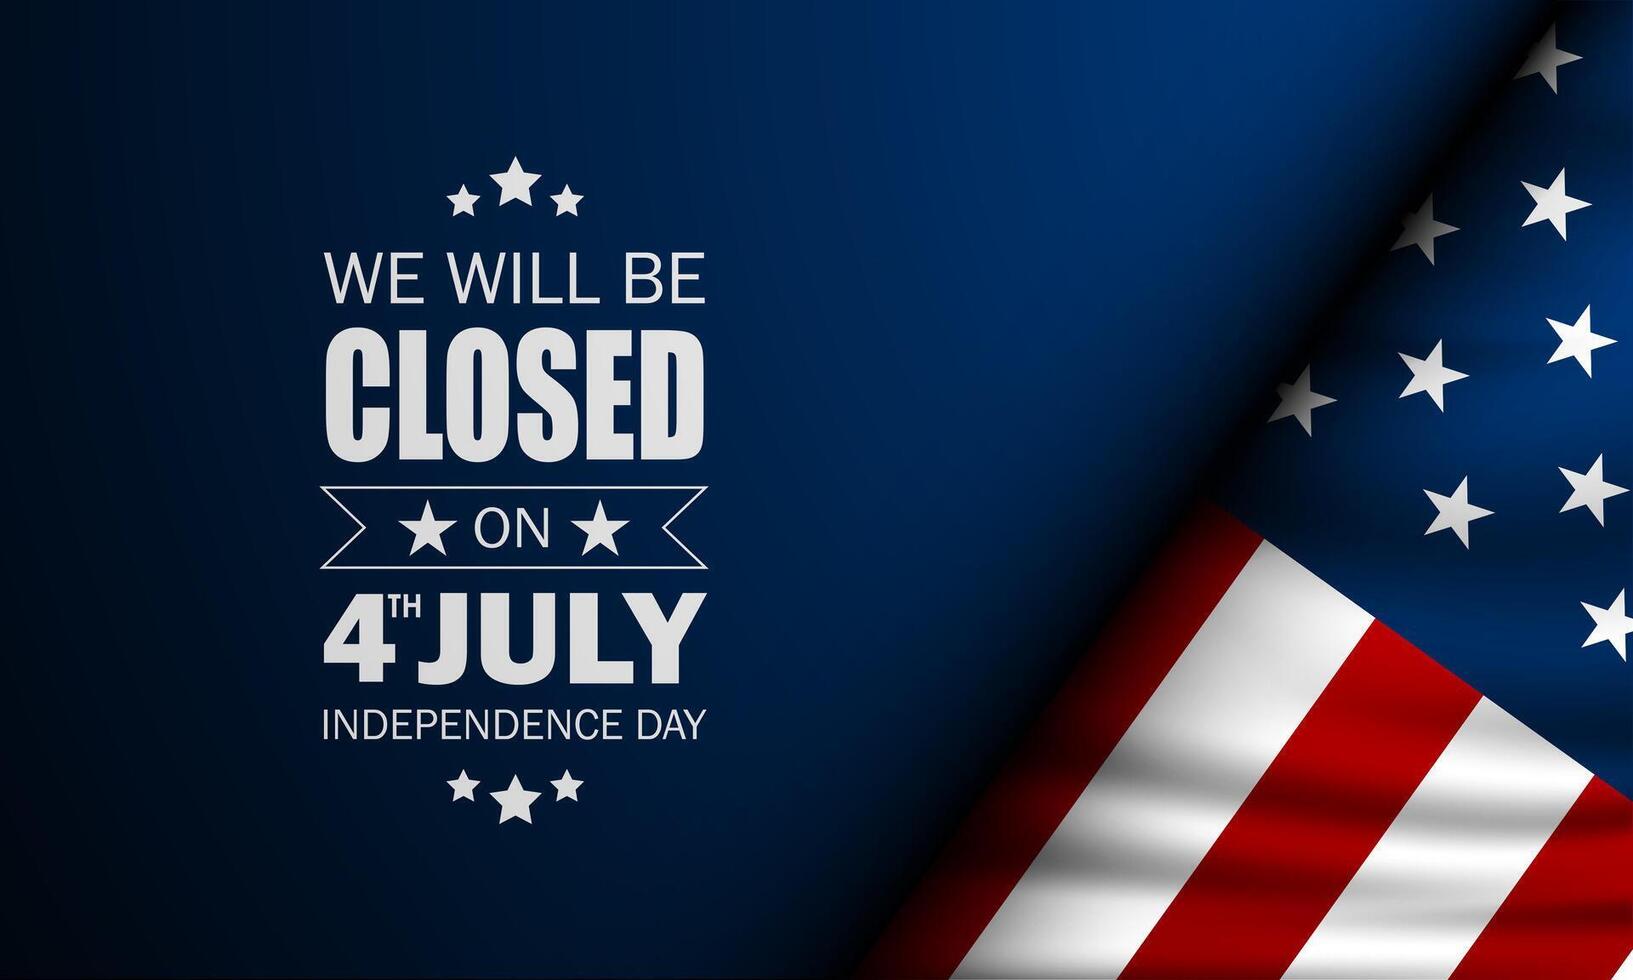 Independence Day USA 4th of July background design with we will be closed text vector